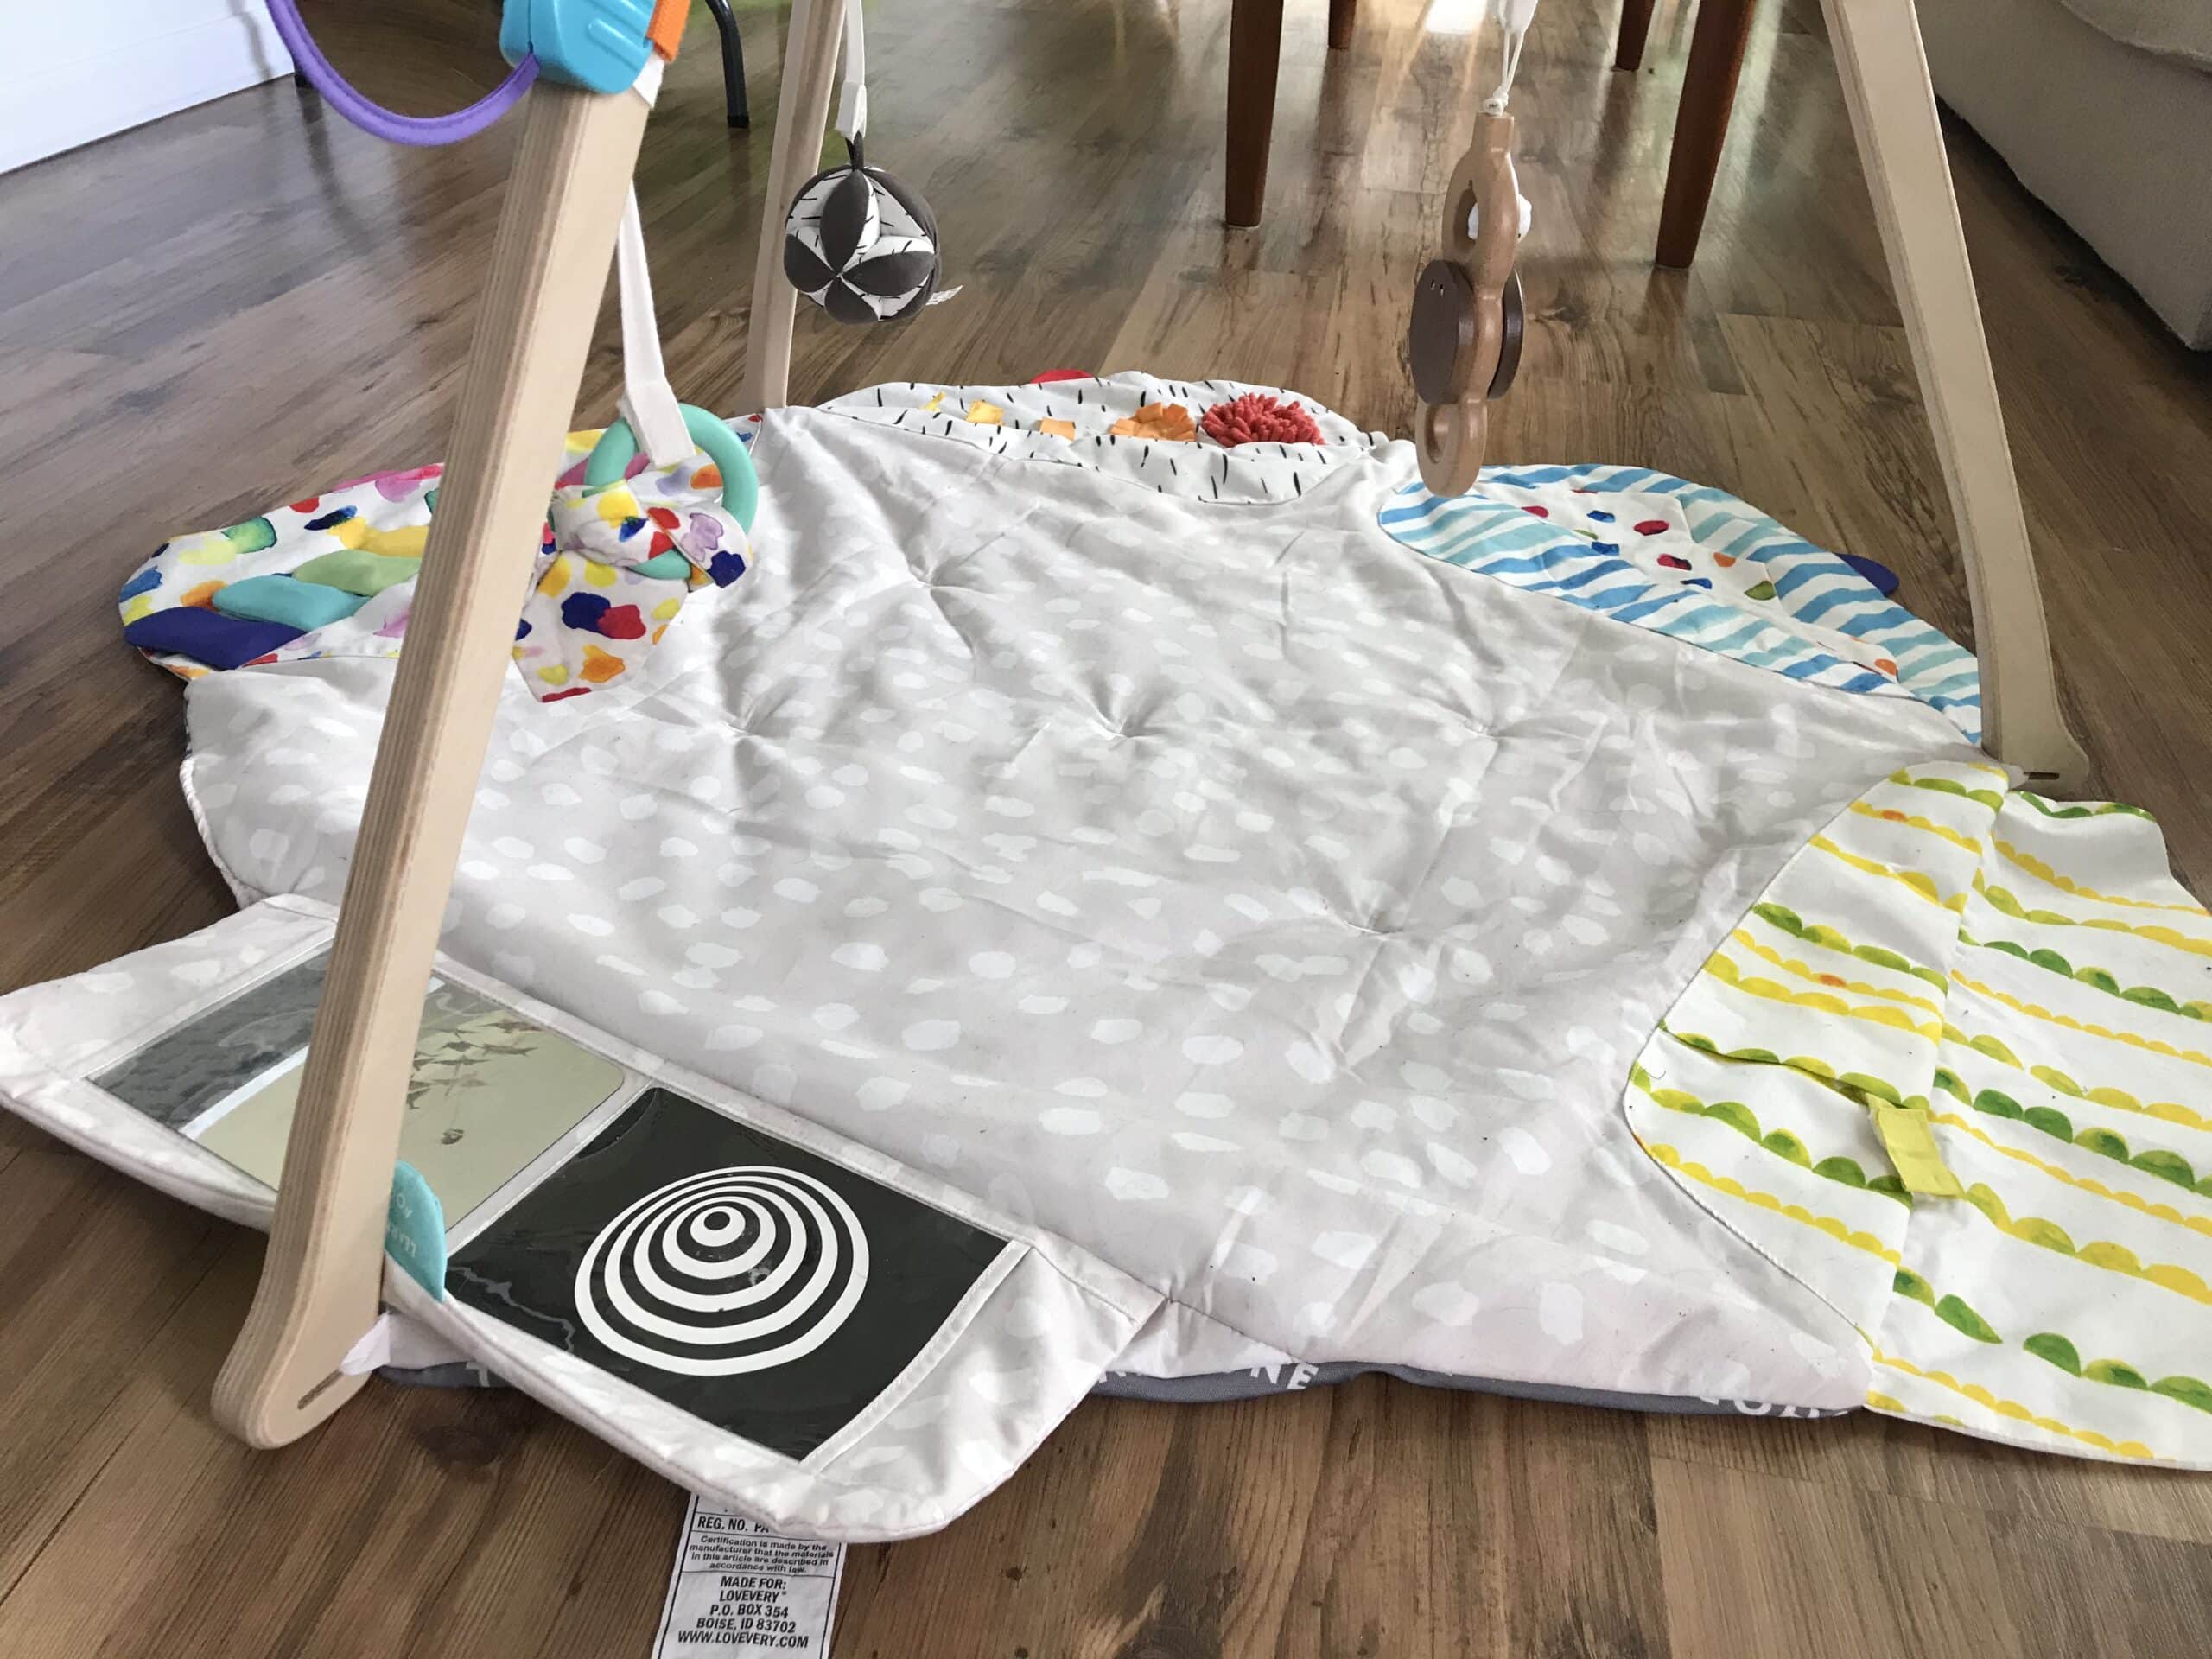 Lovevery The Play Gym review